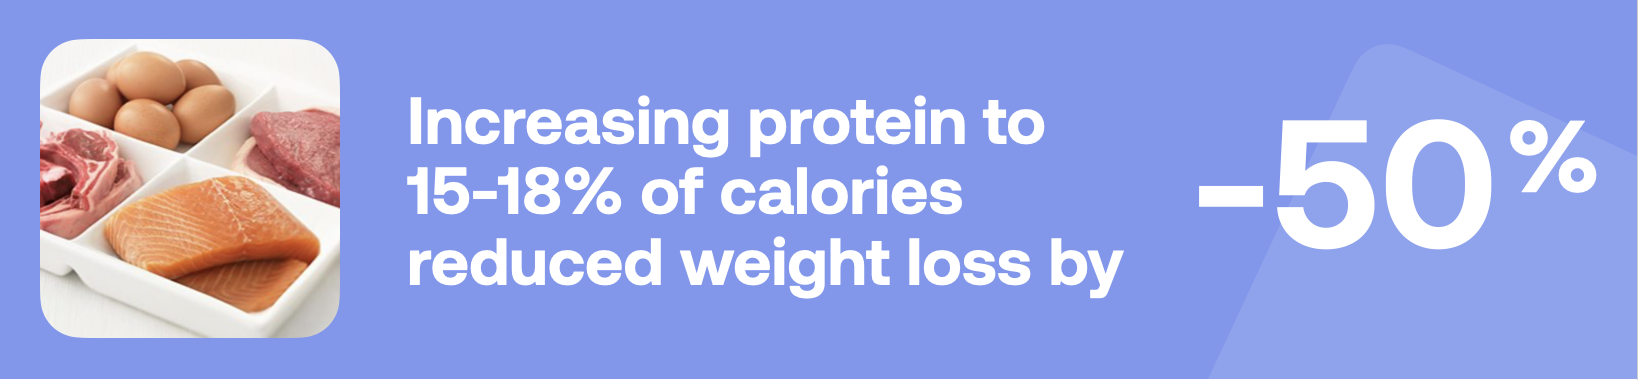 Increasing protein to 15-18% of calories reduced weight loss by 50%